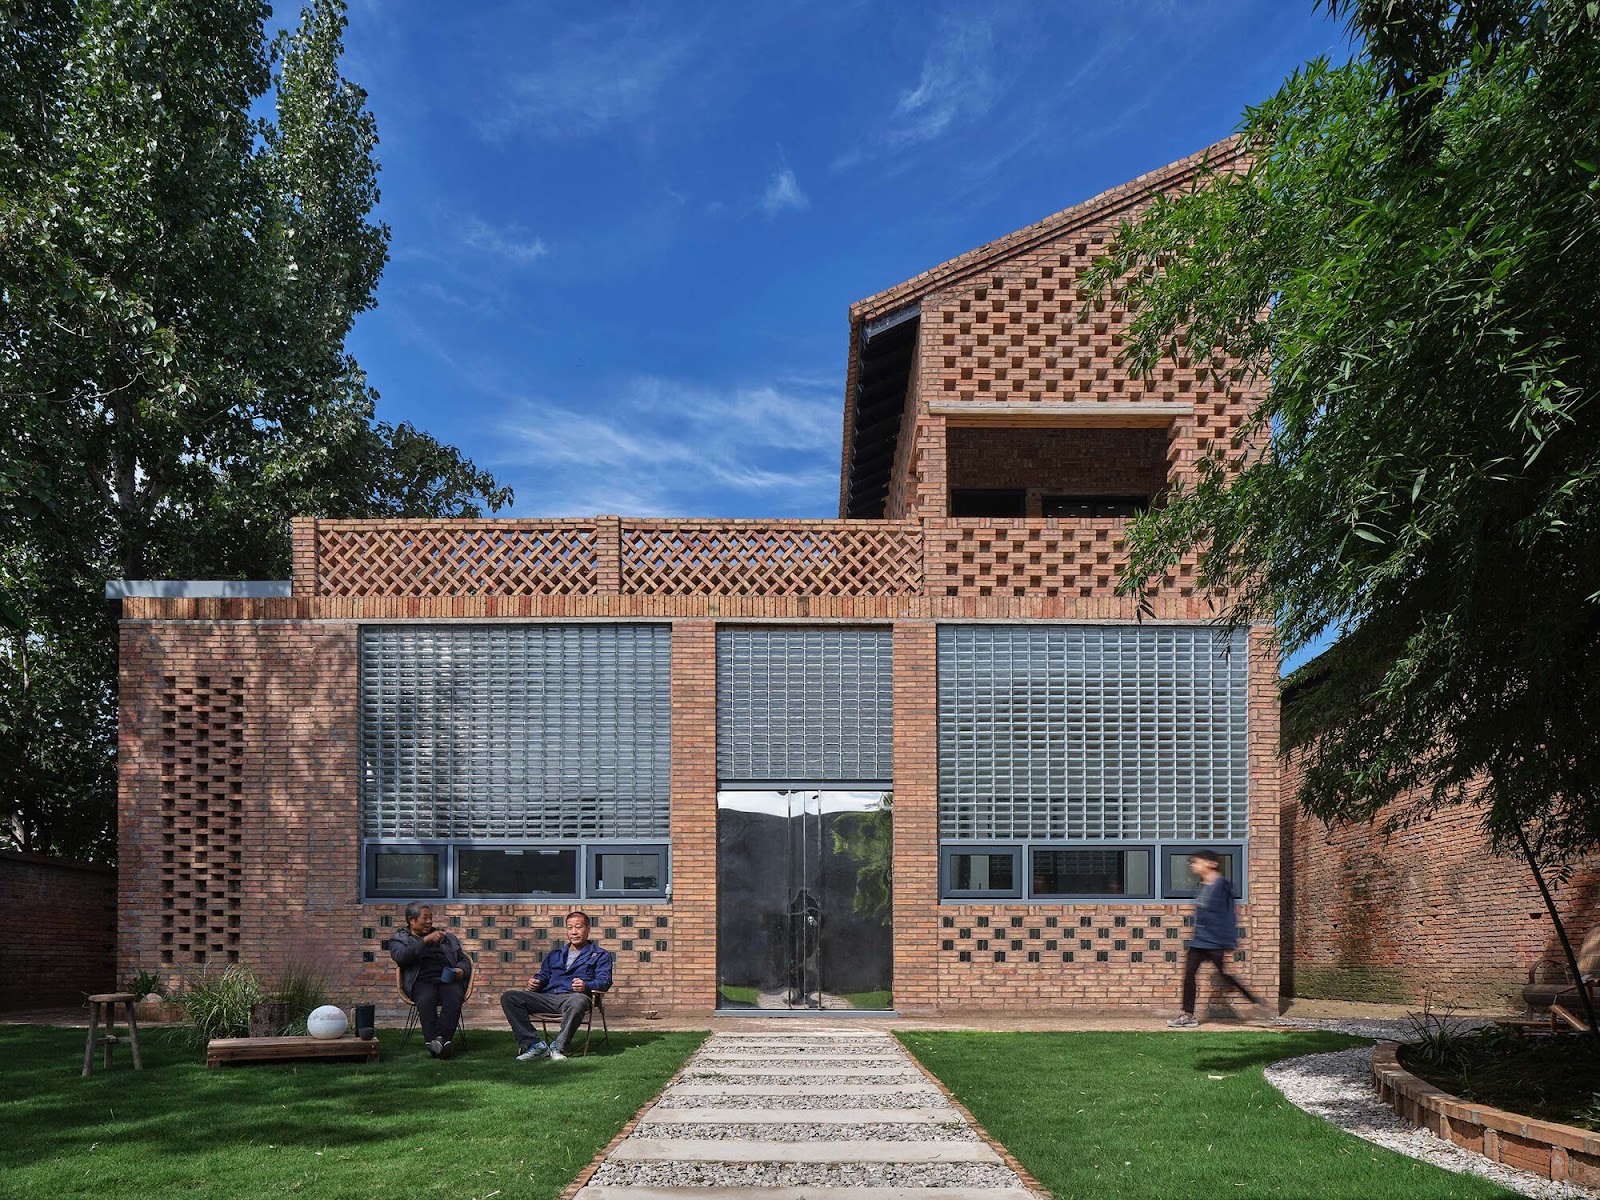 5 Materials For Designing A Modern Luxury House Exterior - Bricks